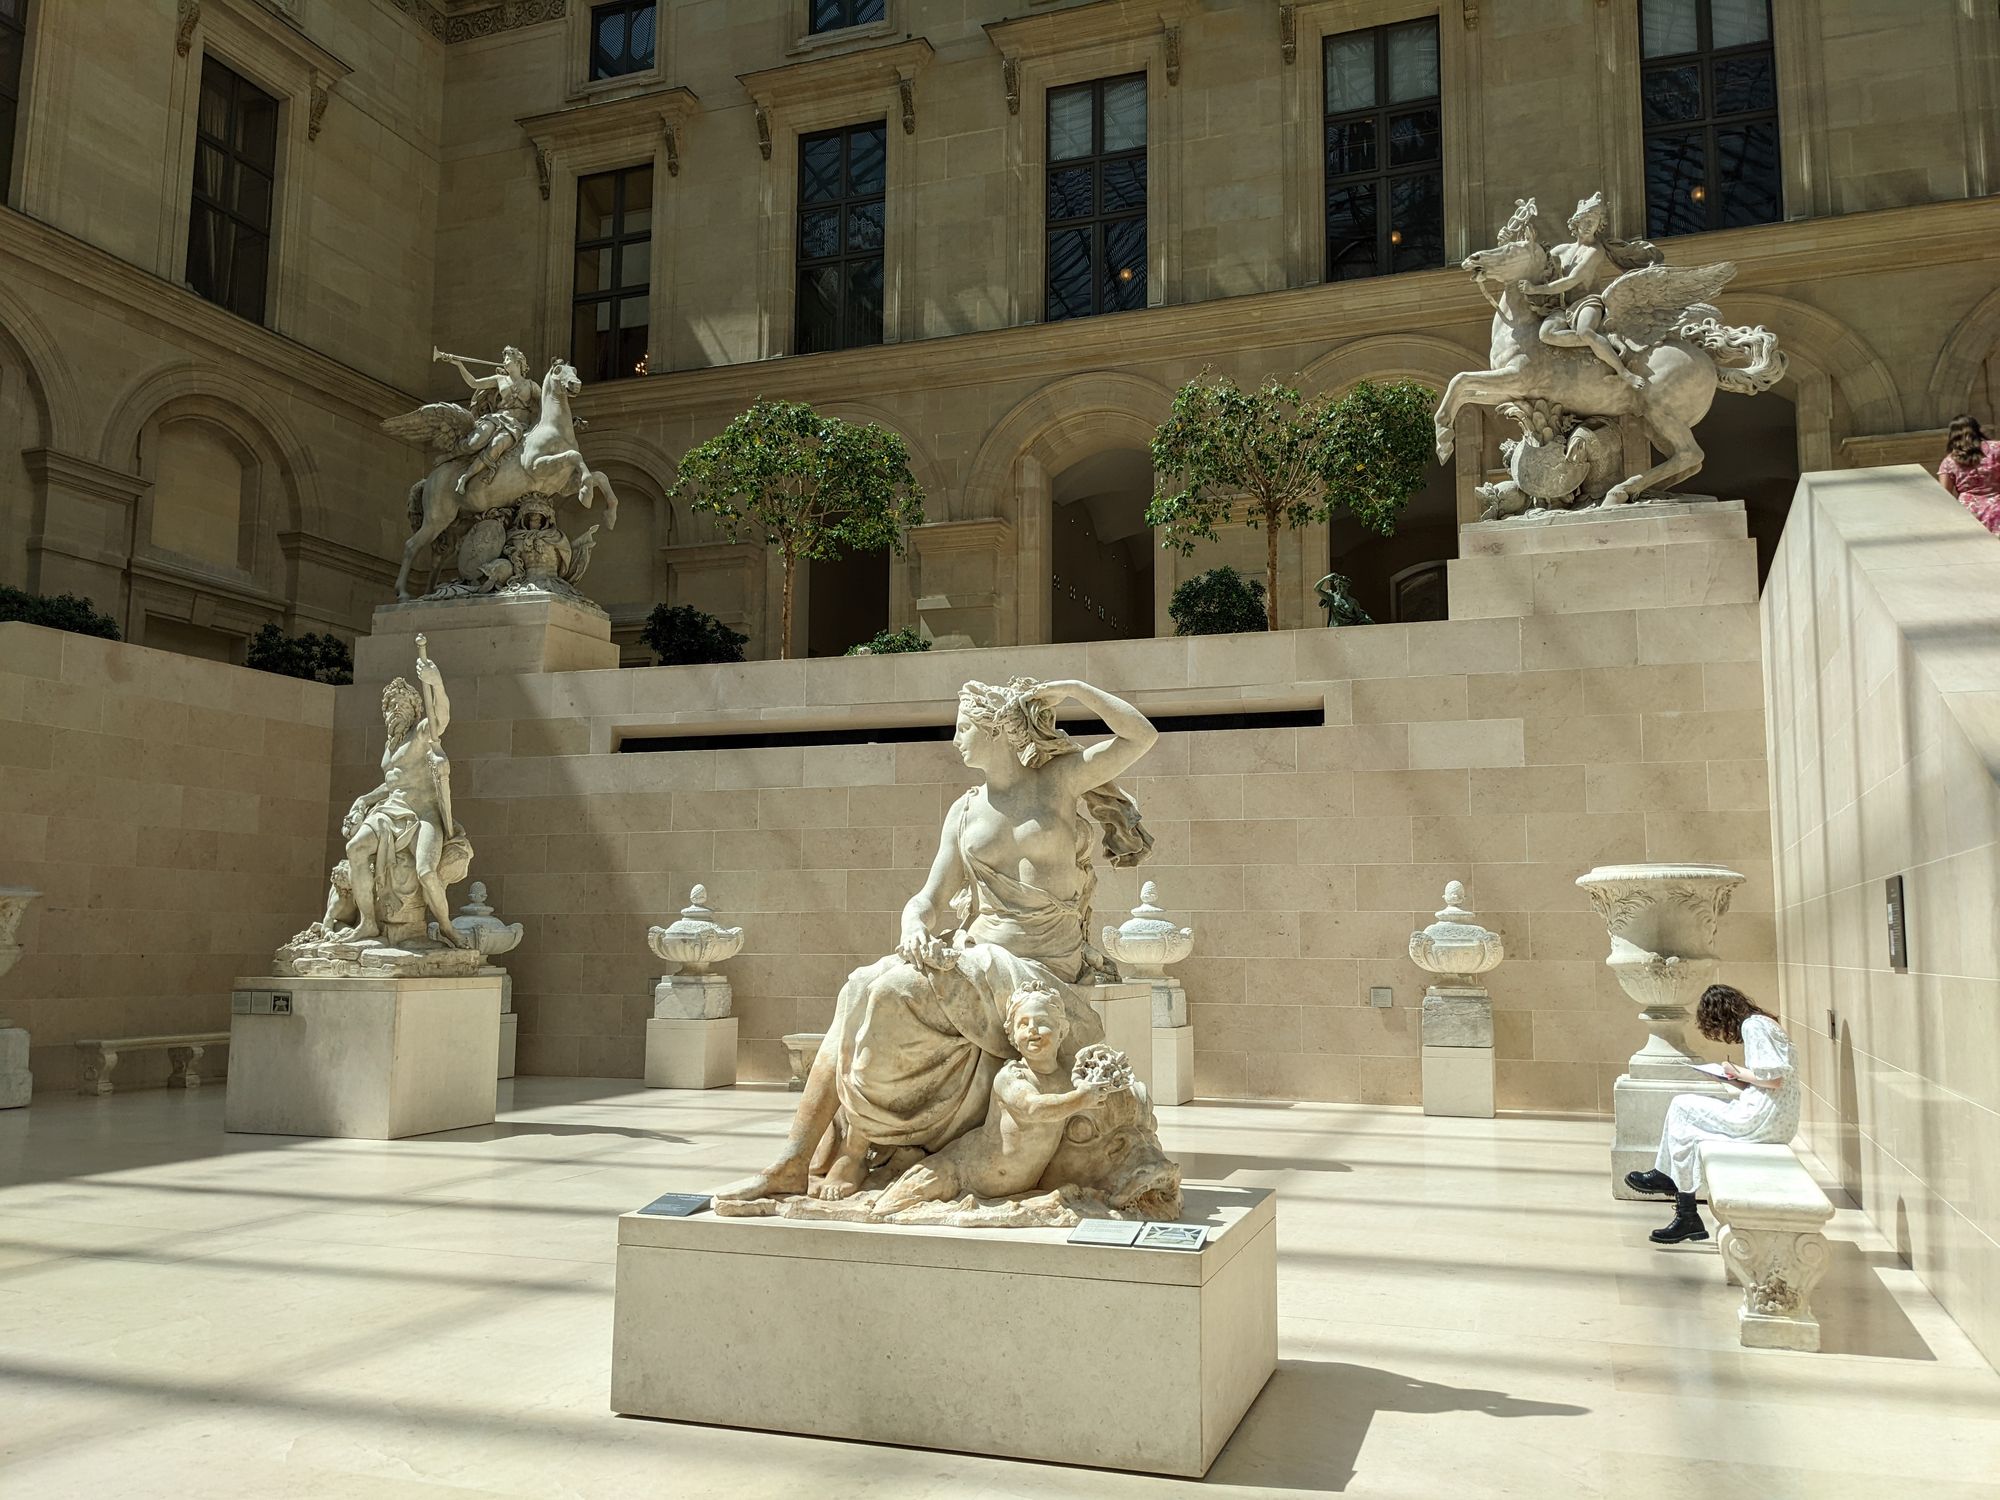 Statues inside the Louvre lit by summer sunshine